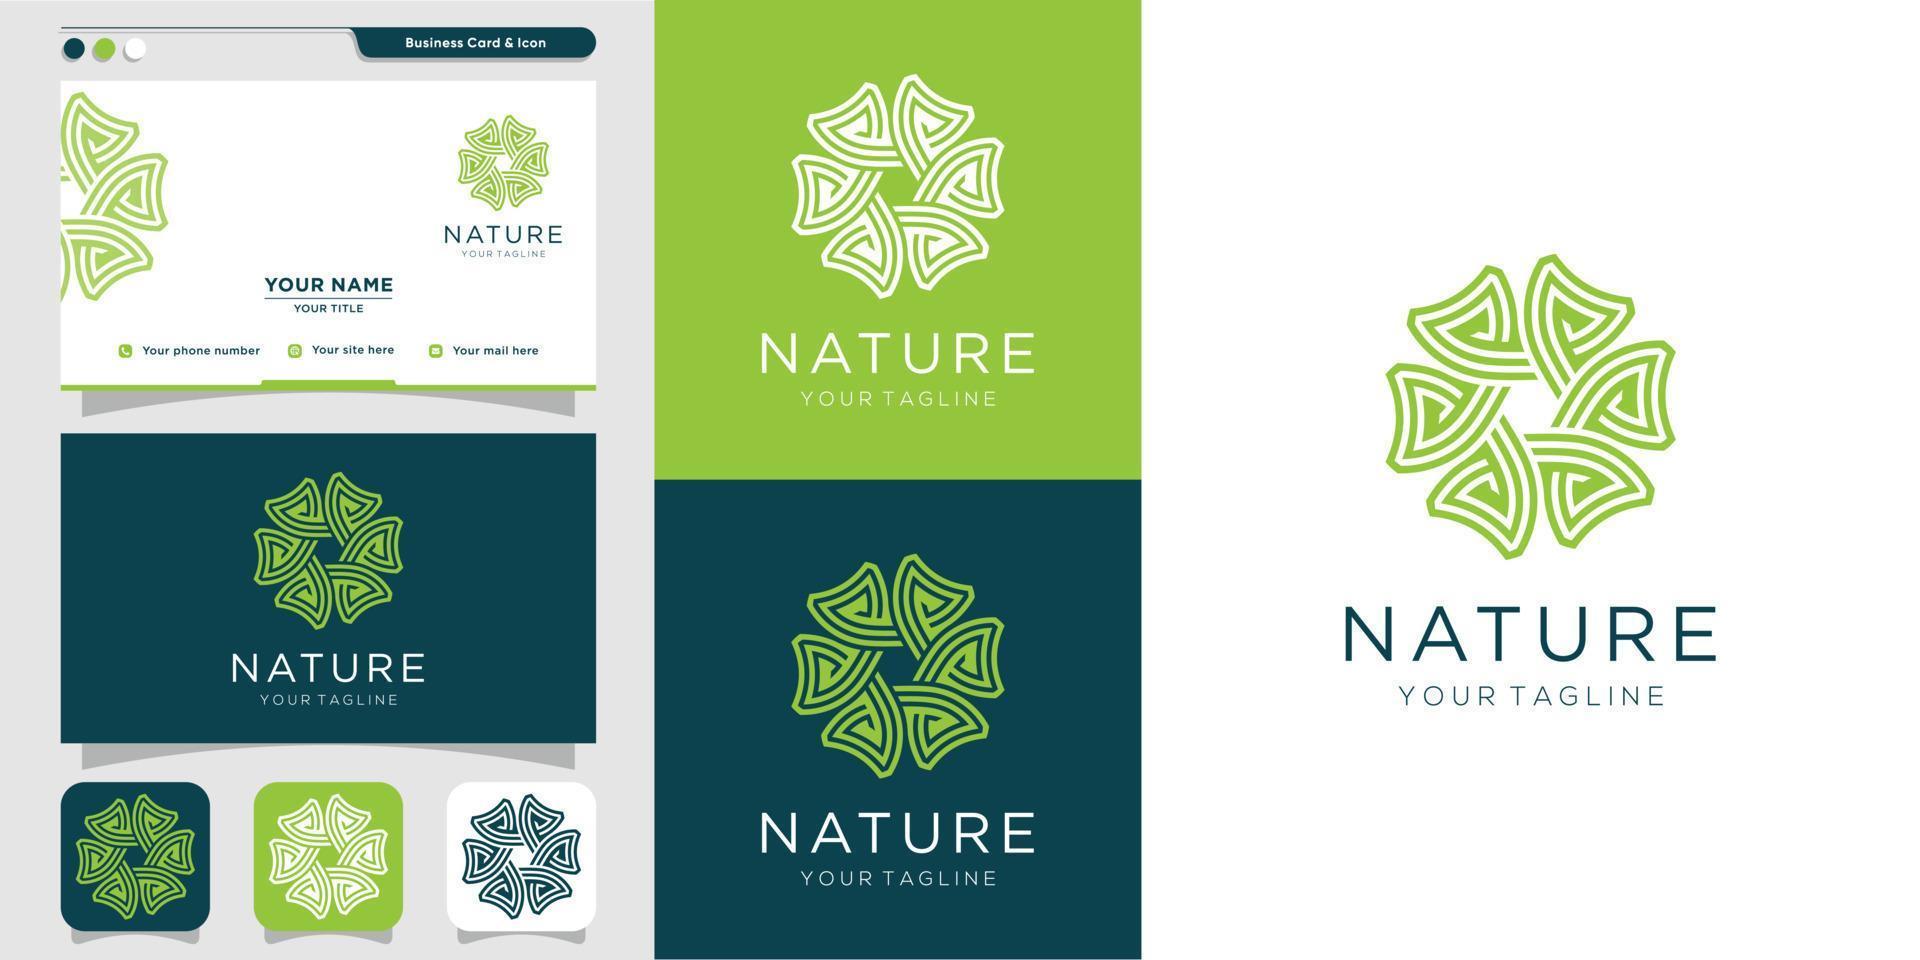 Nature logo with line art style and business card design template, fresh, line art, flower, icon, organic, Premium Vector